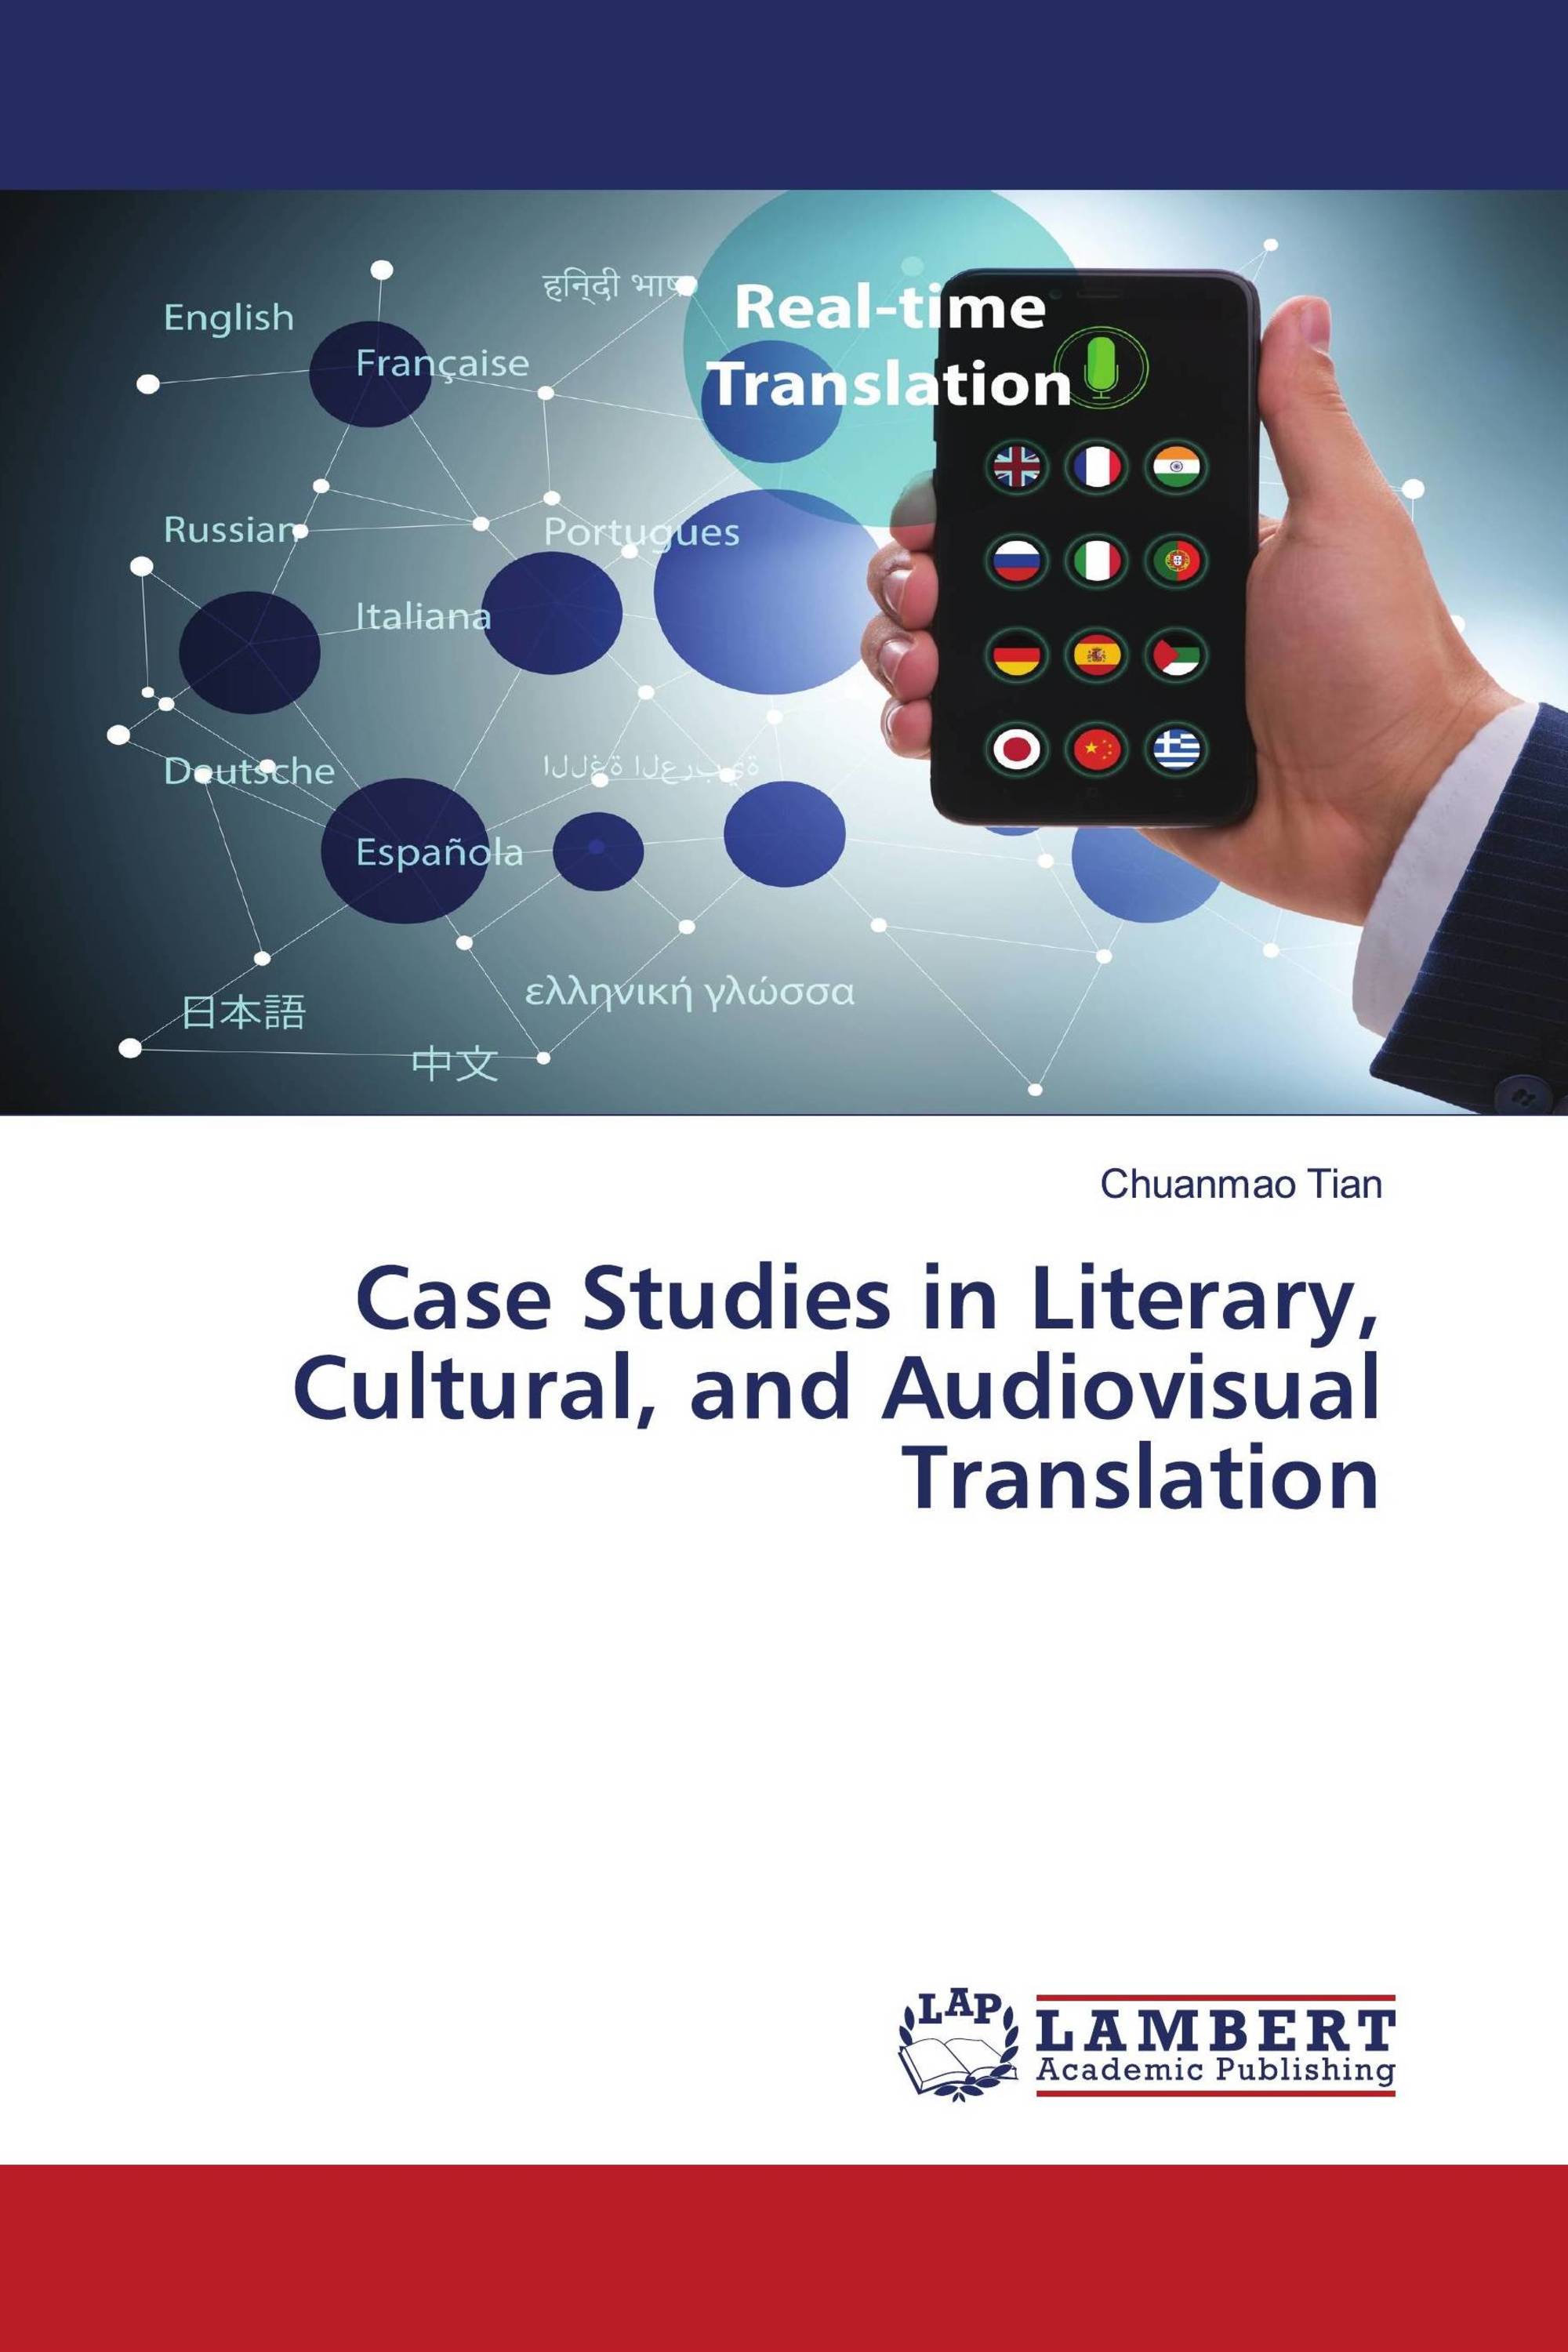 Case Studies in Literary, Cultural, and Audiovisual Translation